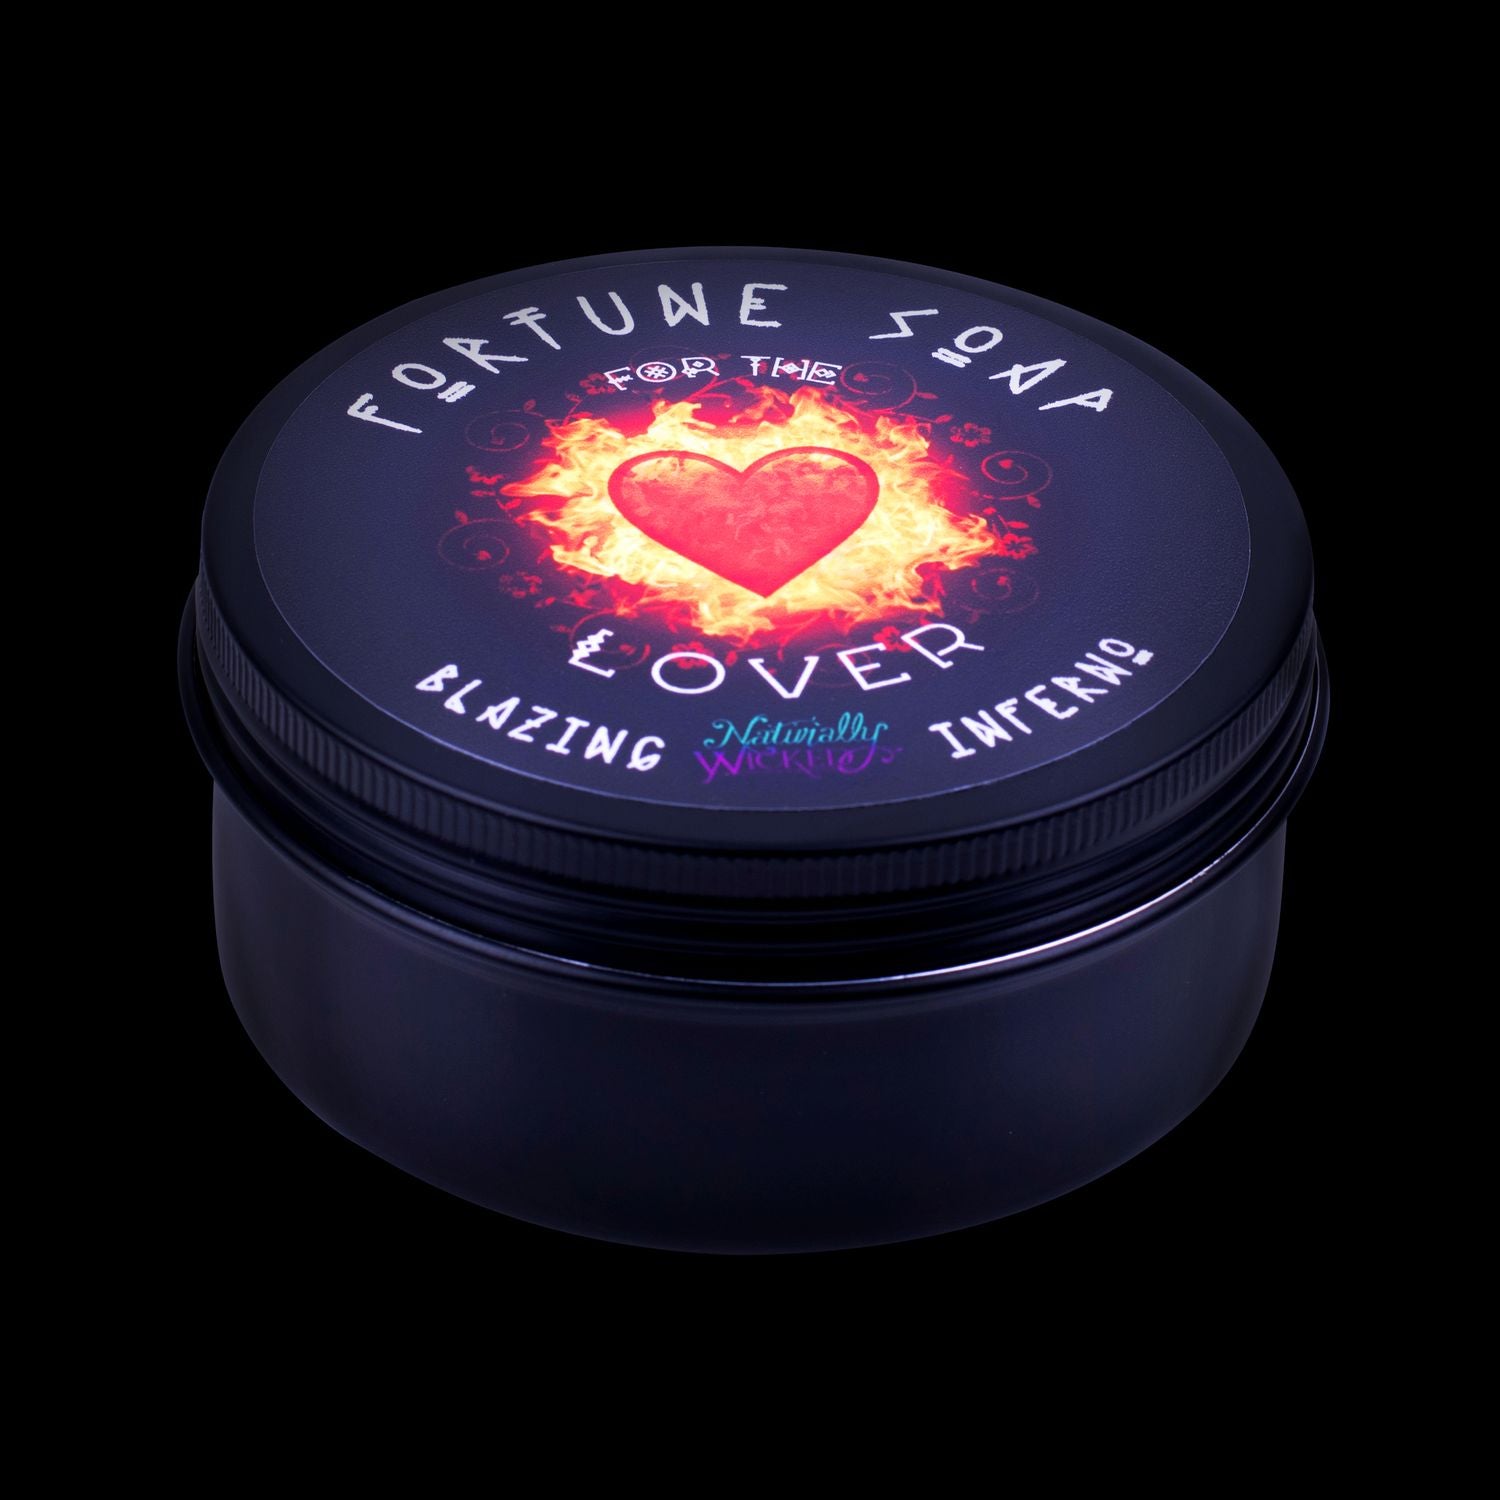 The Perfect Gift For A Lover. Naturally Wicked Fortune Soap For The Lover. Black Gloss Gift Tin Included